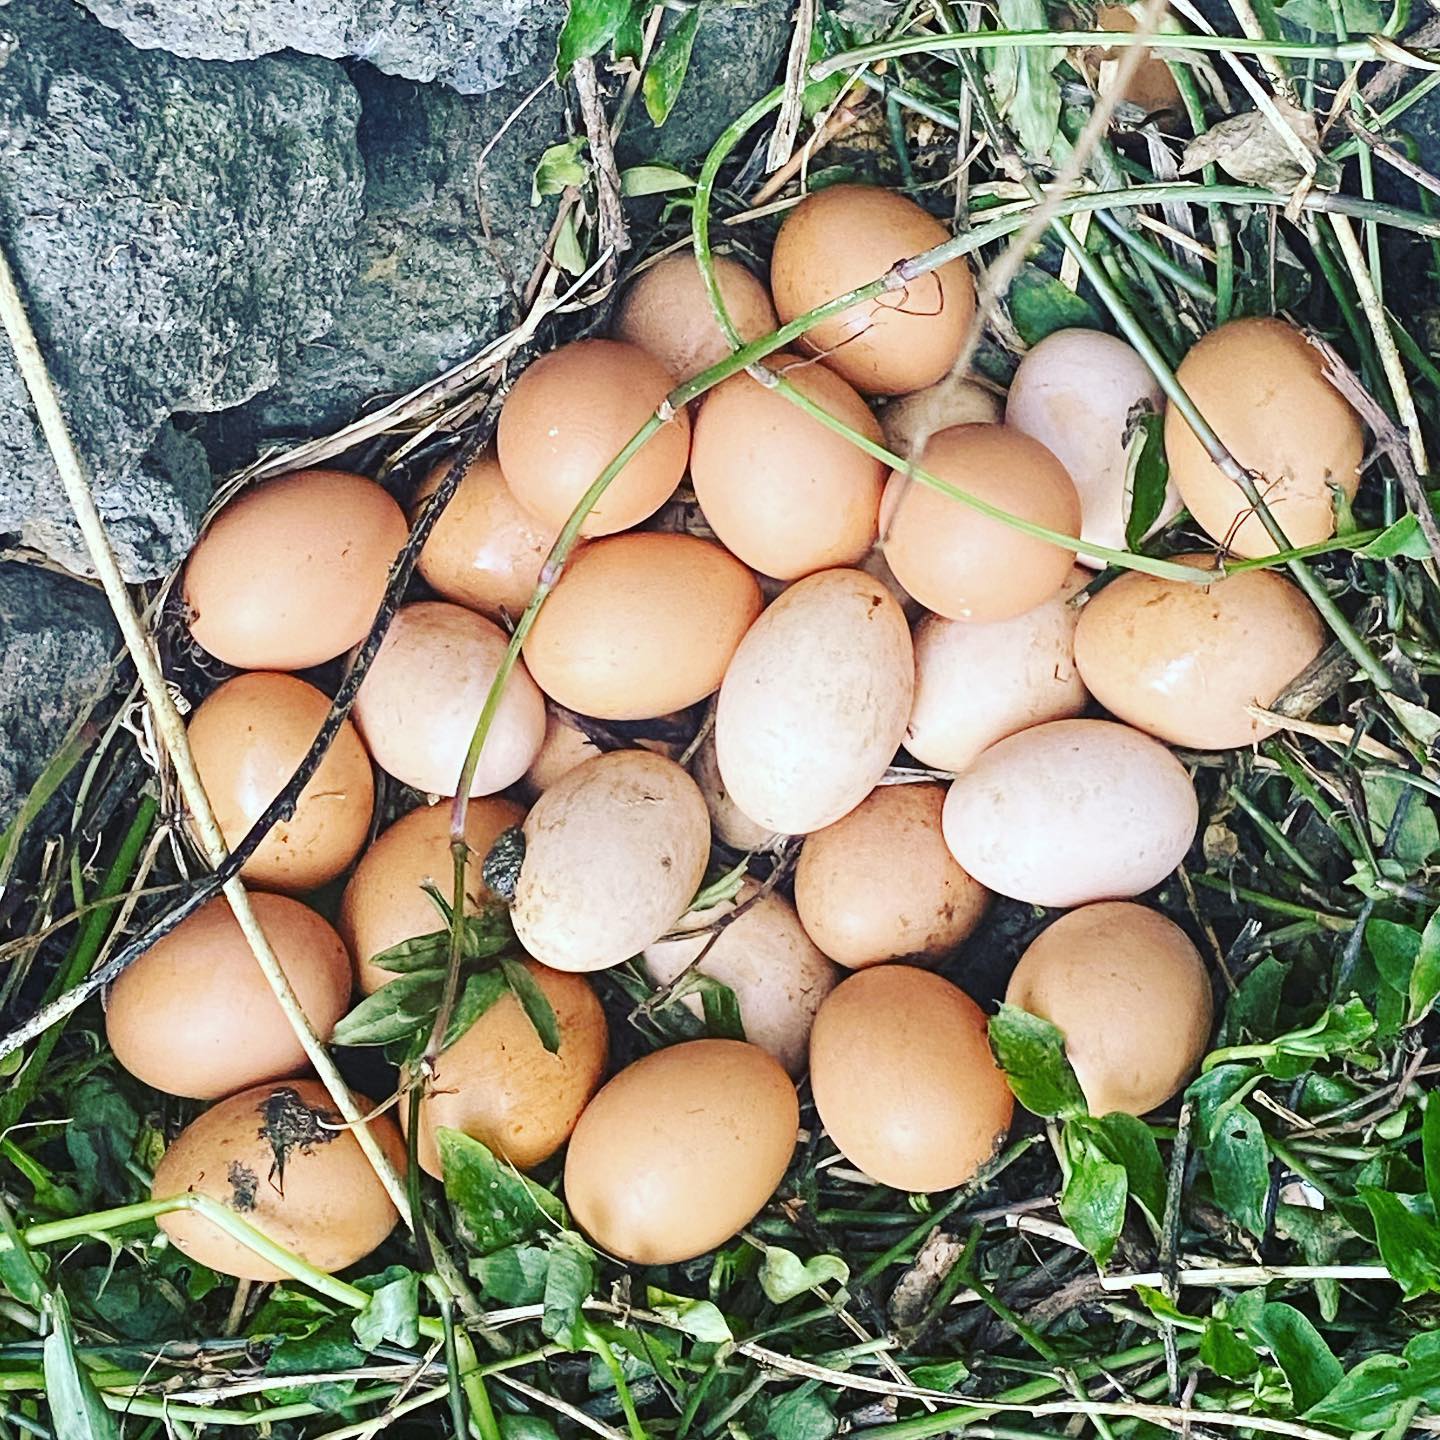 Found a new secret stack of eggs hiding in the field… 31 eggs !!